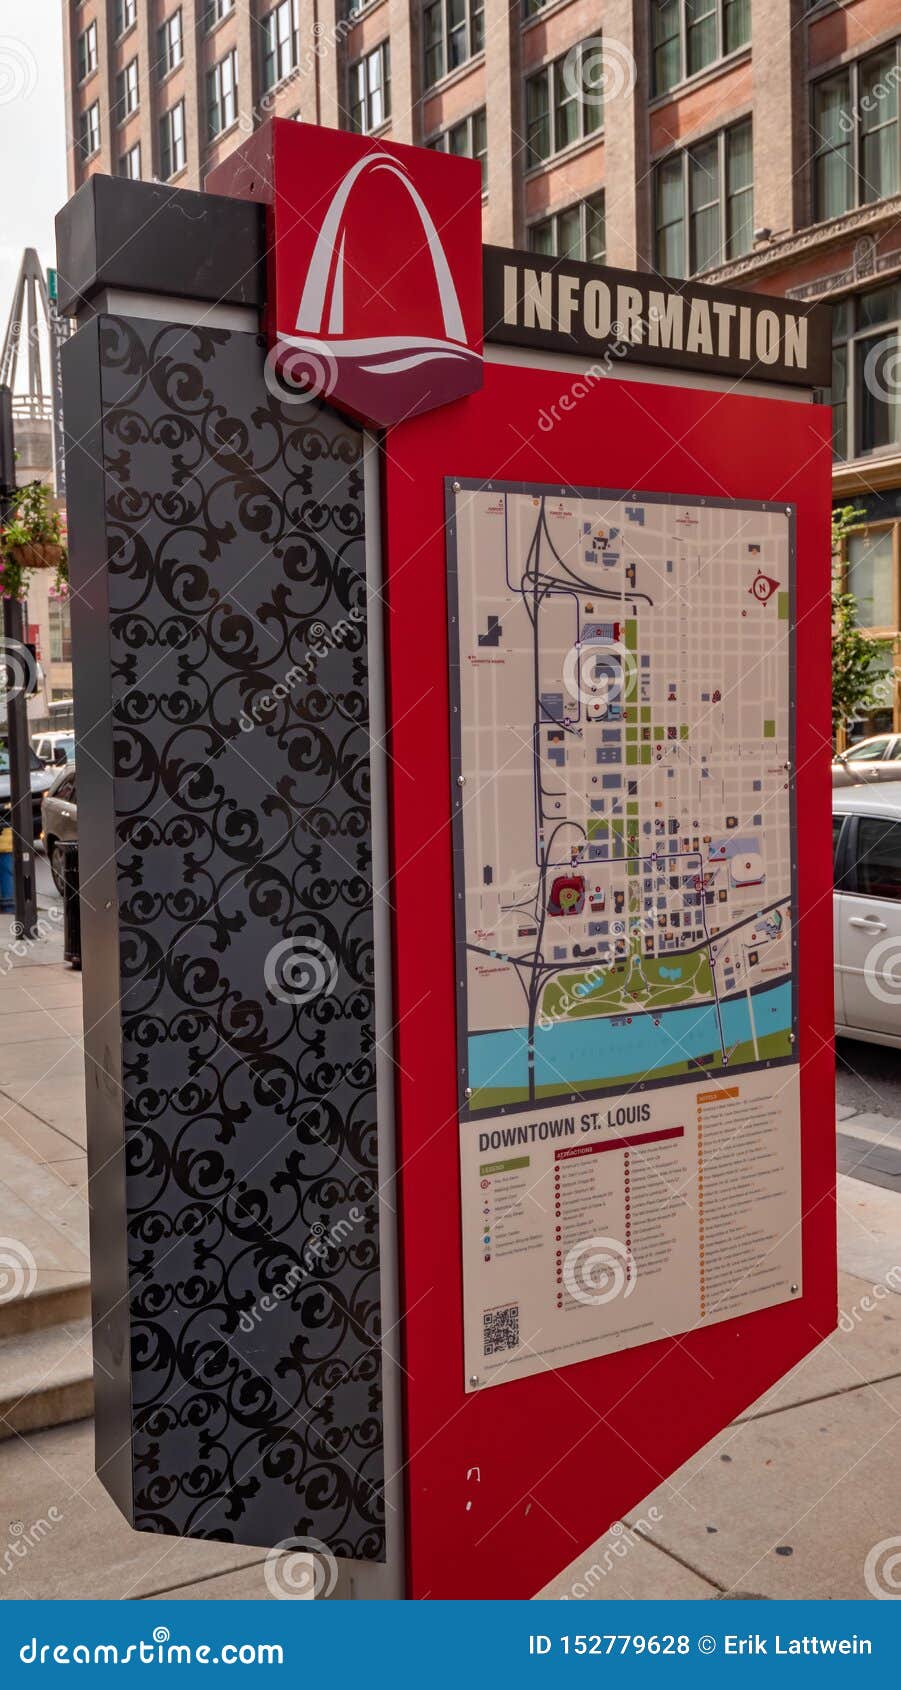 Downtown St Louis Information Map - ST. LOUIS, USA - JUNE 19, 2019 Editorial Stock Photo - Image ...